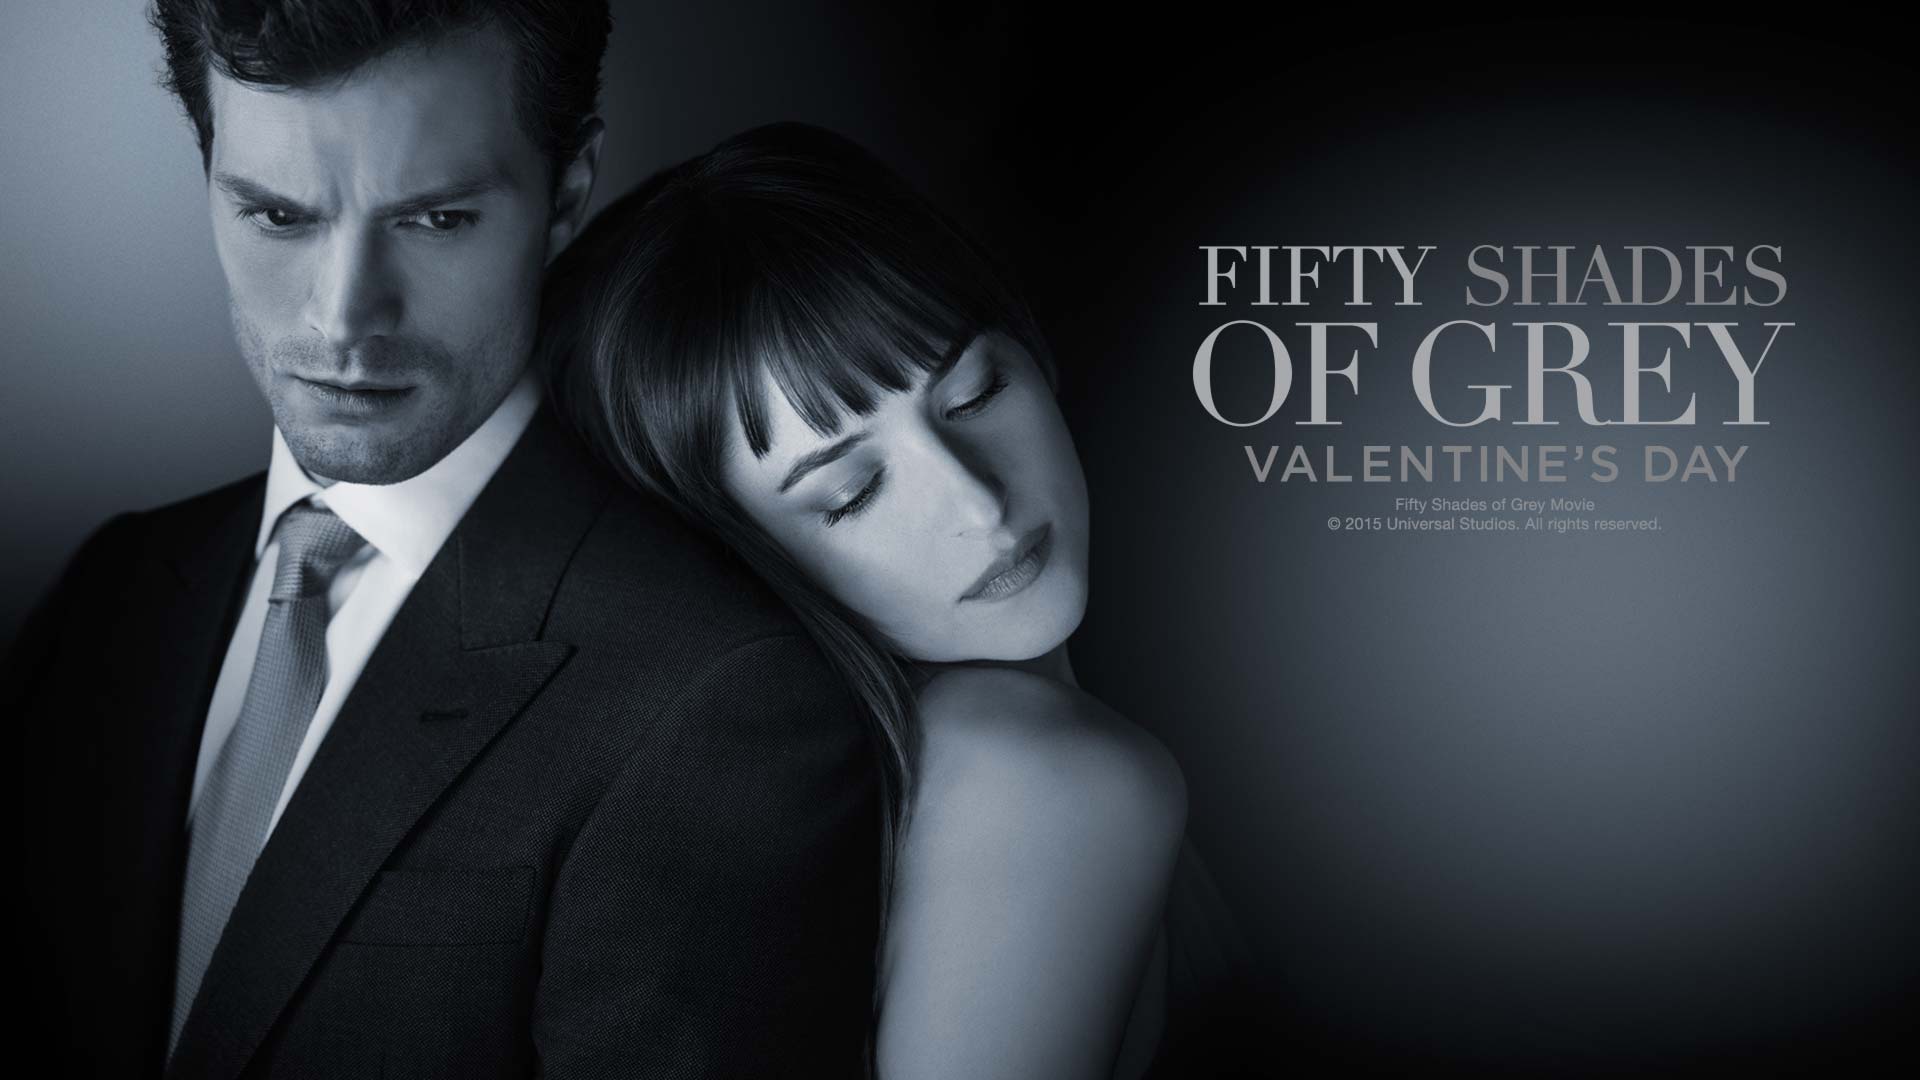 The FIFTY SHADES OF GREY Blu-ray Steelbook is being released as a Future Shop Exclusive